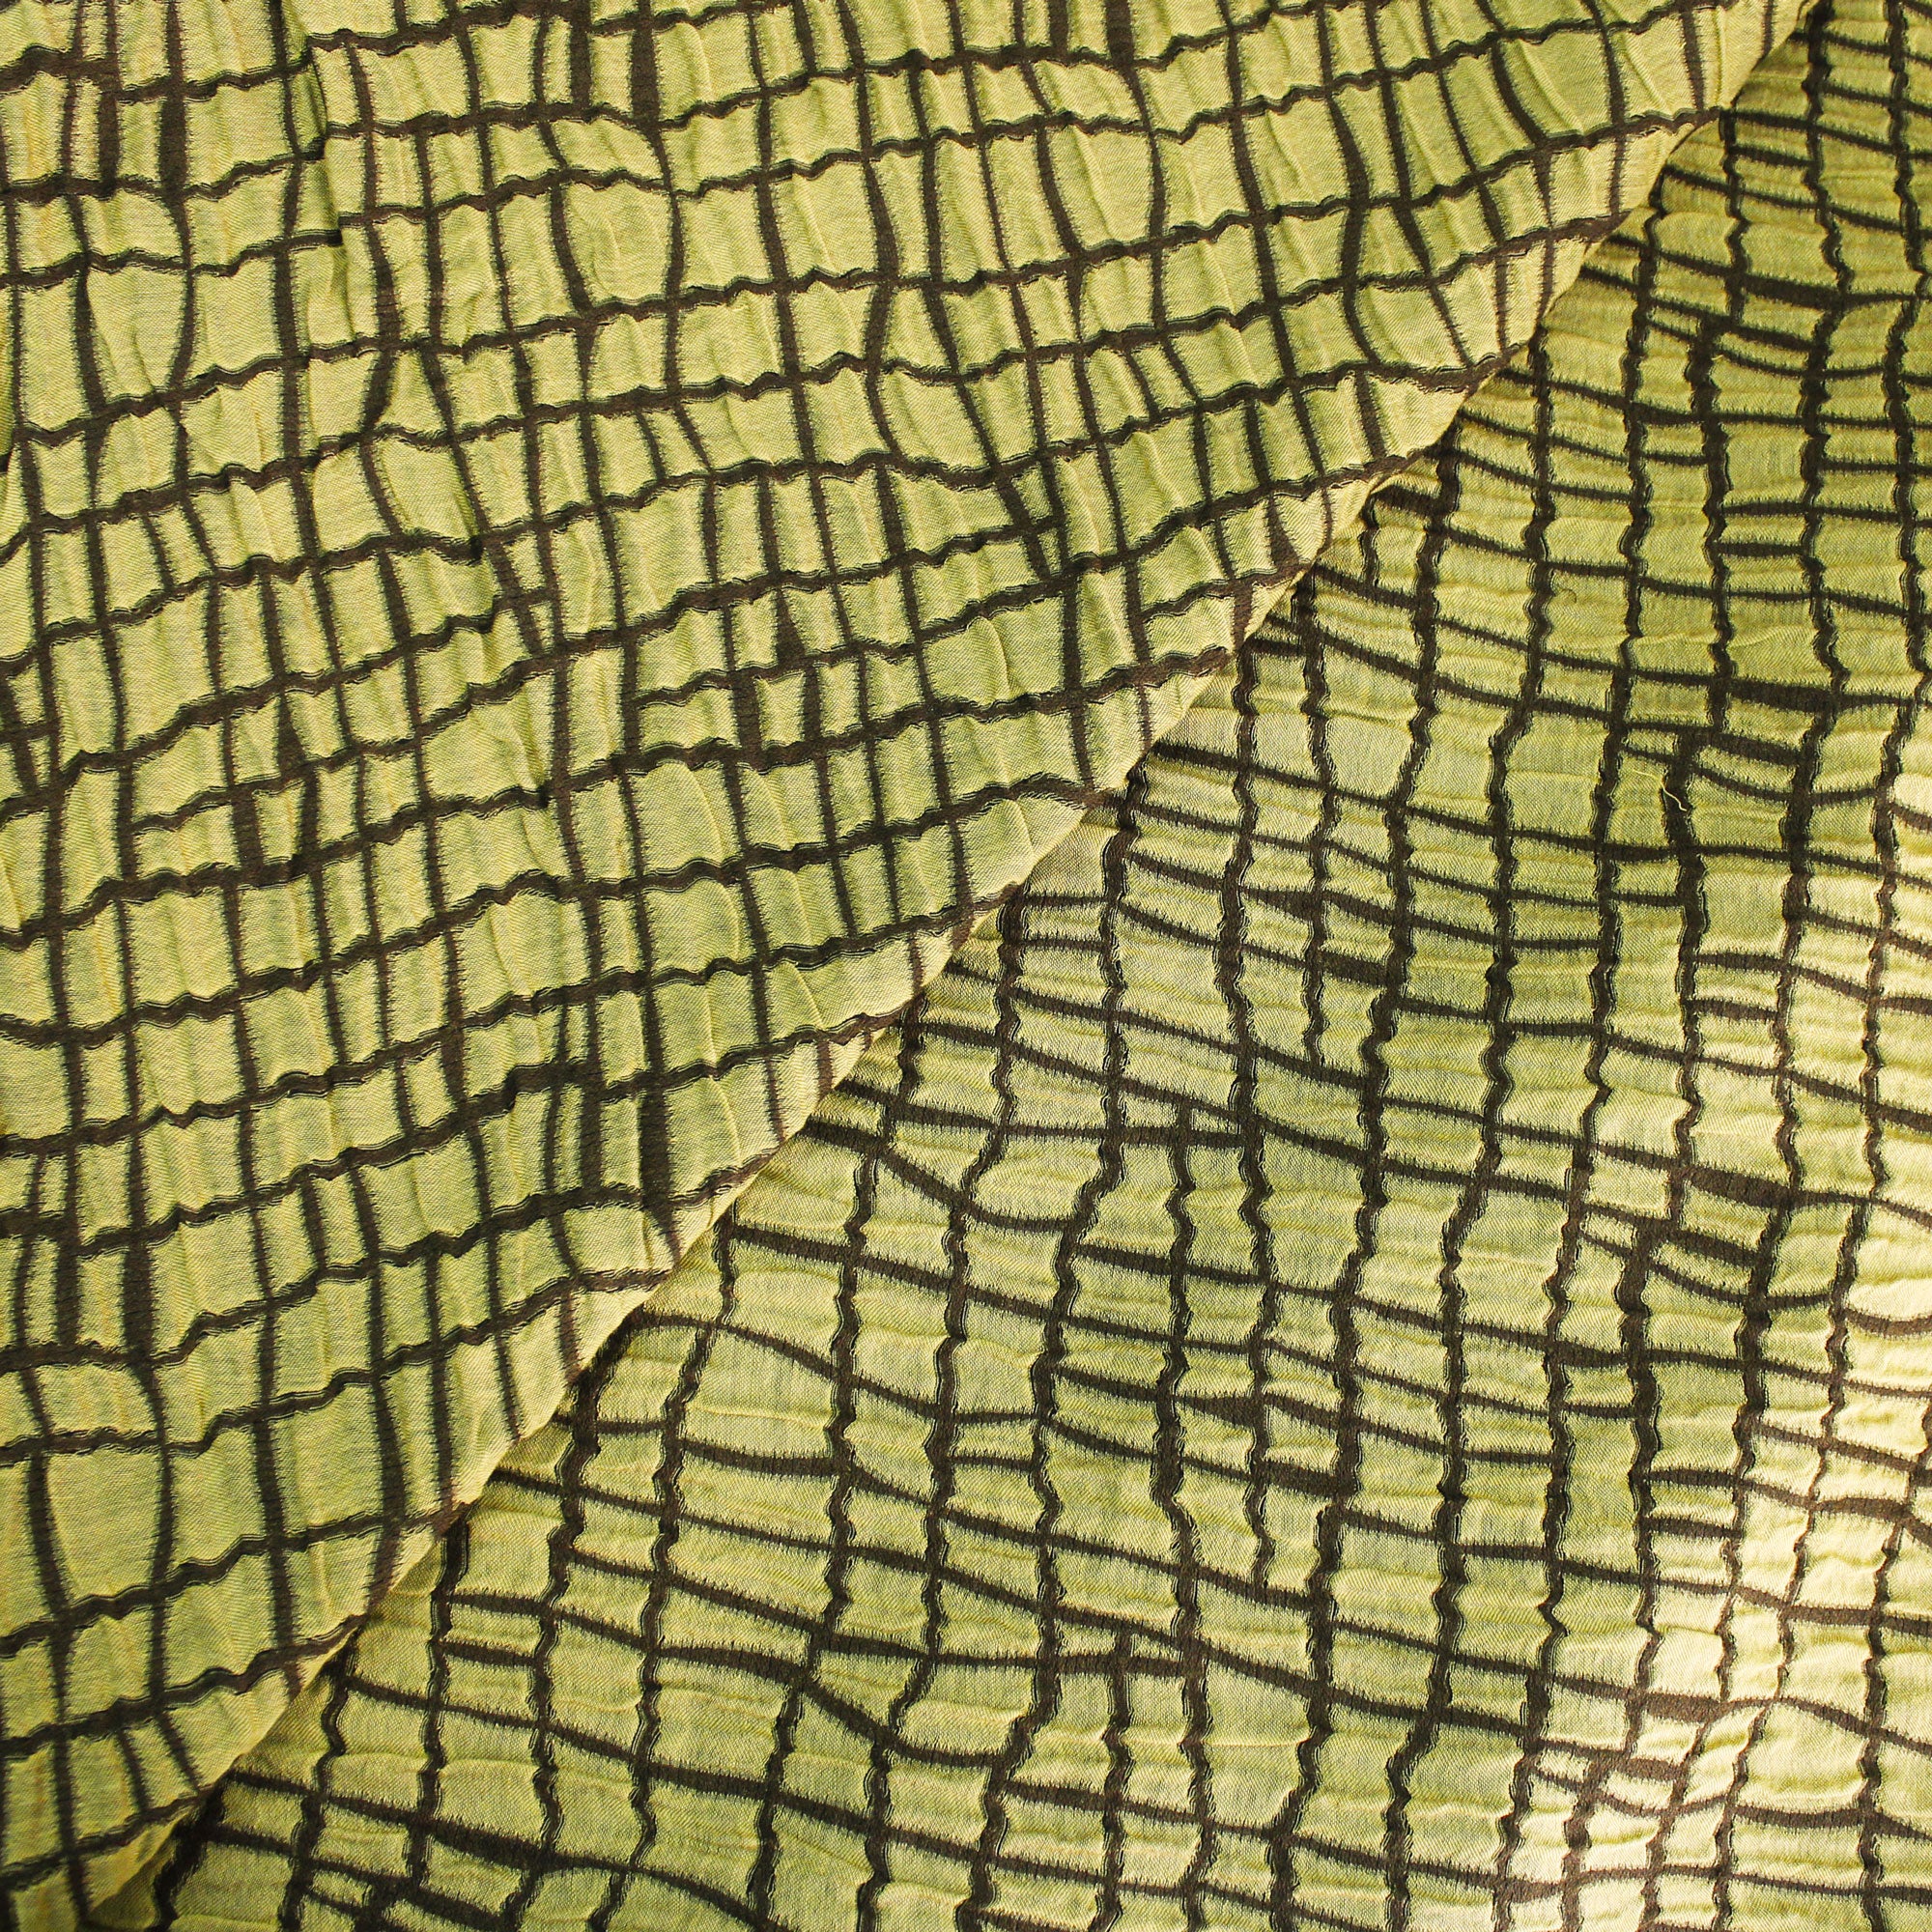 Reversible cotton jacquard fabric with olive green and khaki checks